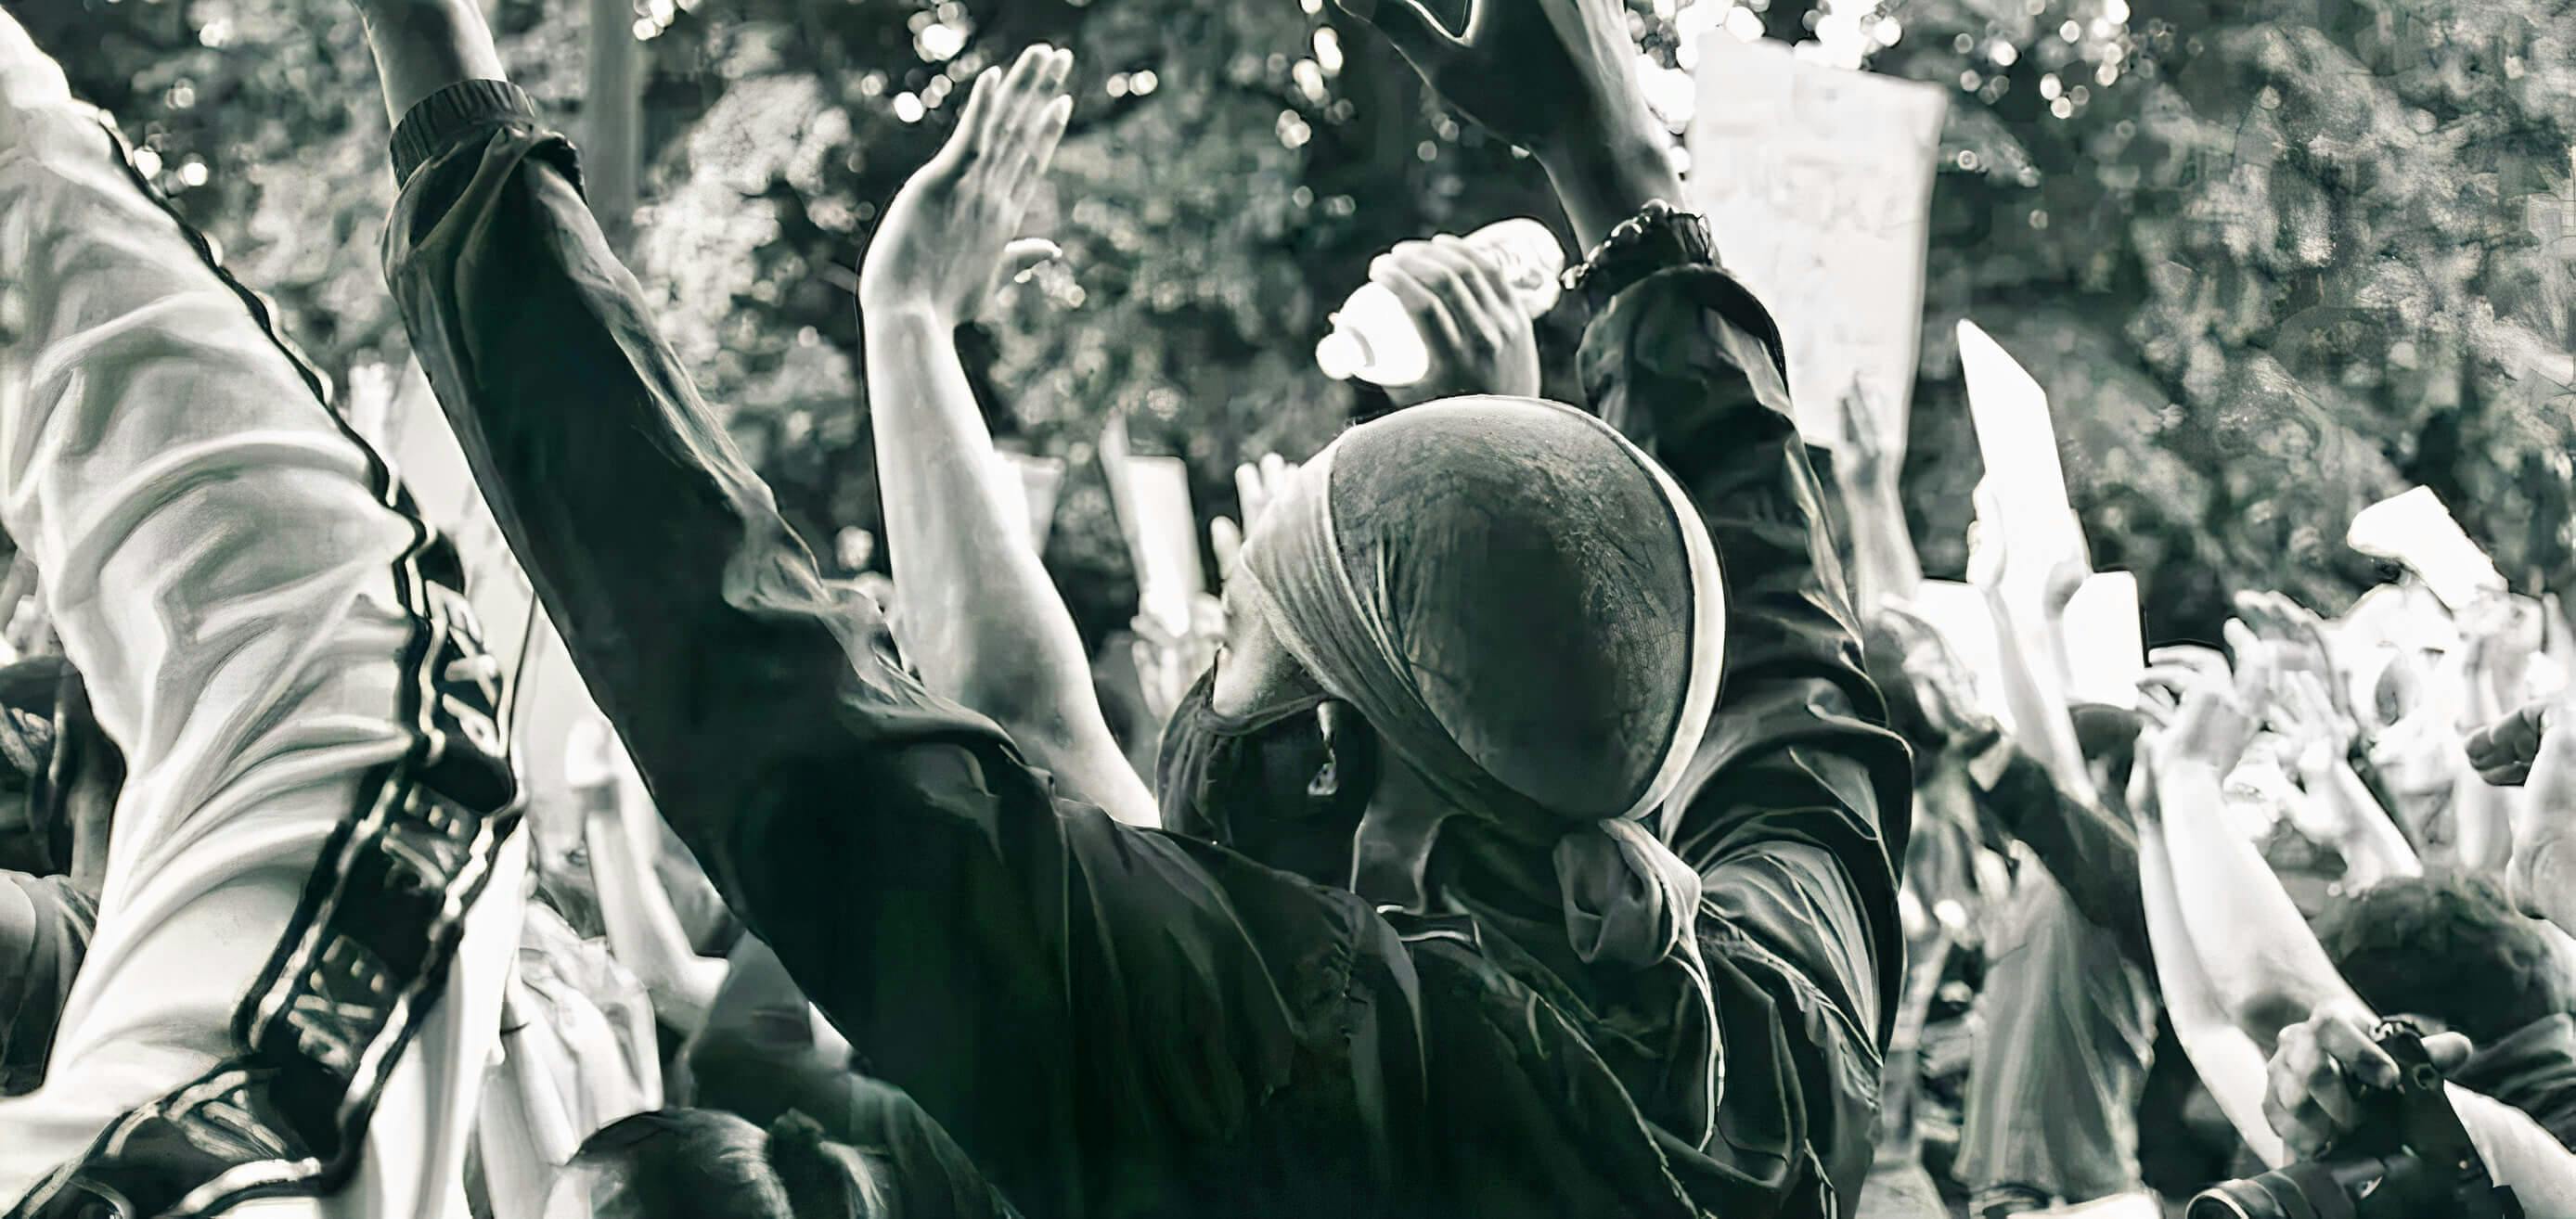 black and white image of a protest